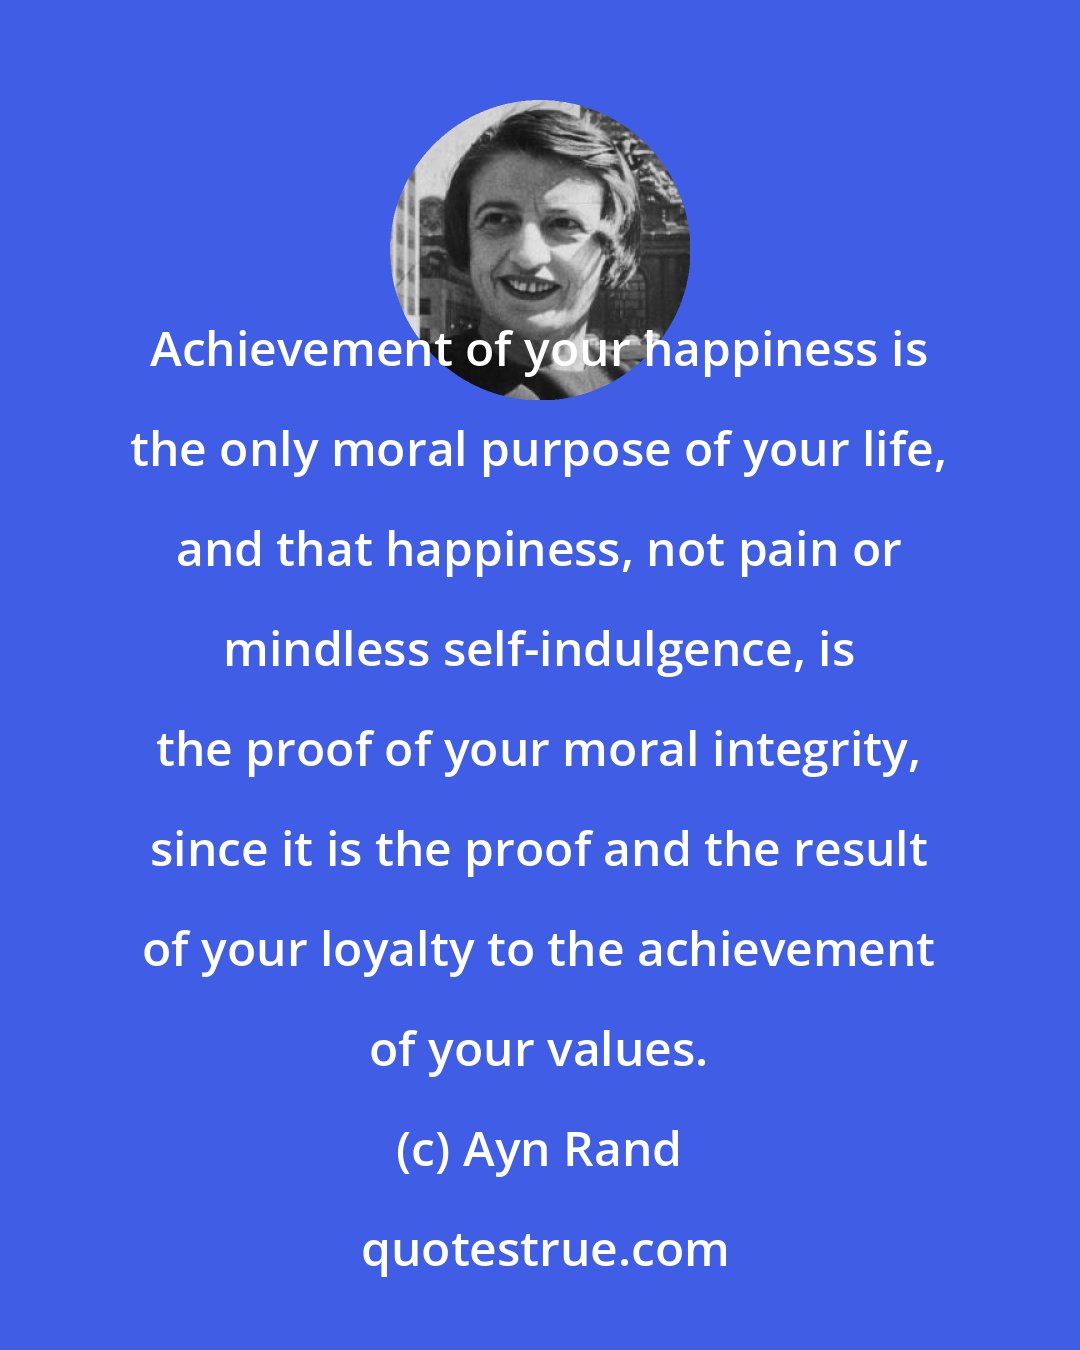 Ayn Rand: Achievement of your happiness is the only moral purpose of your life, and that happiness, not pain or mindless self-indulgence, is the proof of your moral integrity, since it is the proof and the result of your loyalty to the achievement of your values.